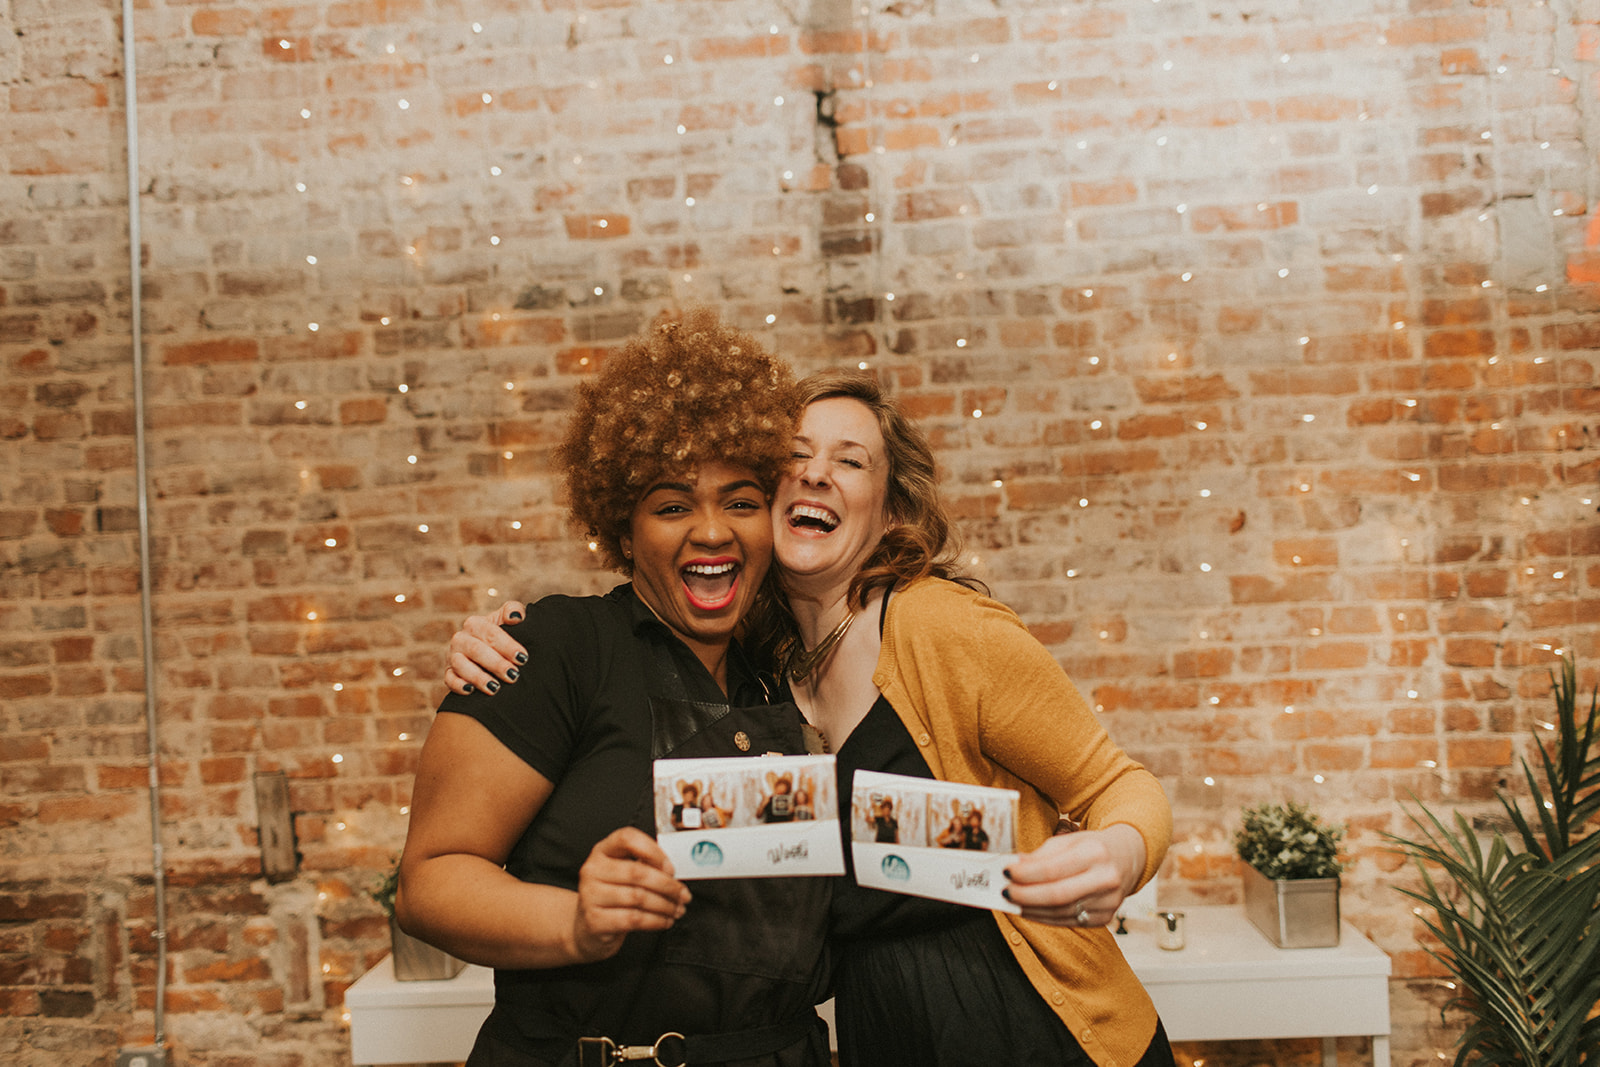 District Bliss is a community of introverted and extroverted entrepreneurs and creatives who are sick of the stodgy and want to break free in order to build their business with ease.